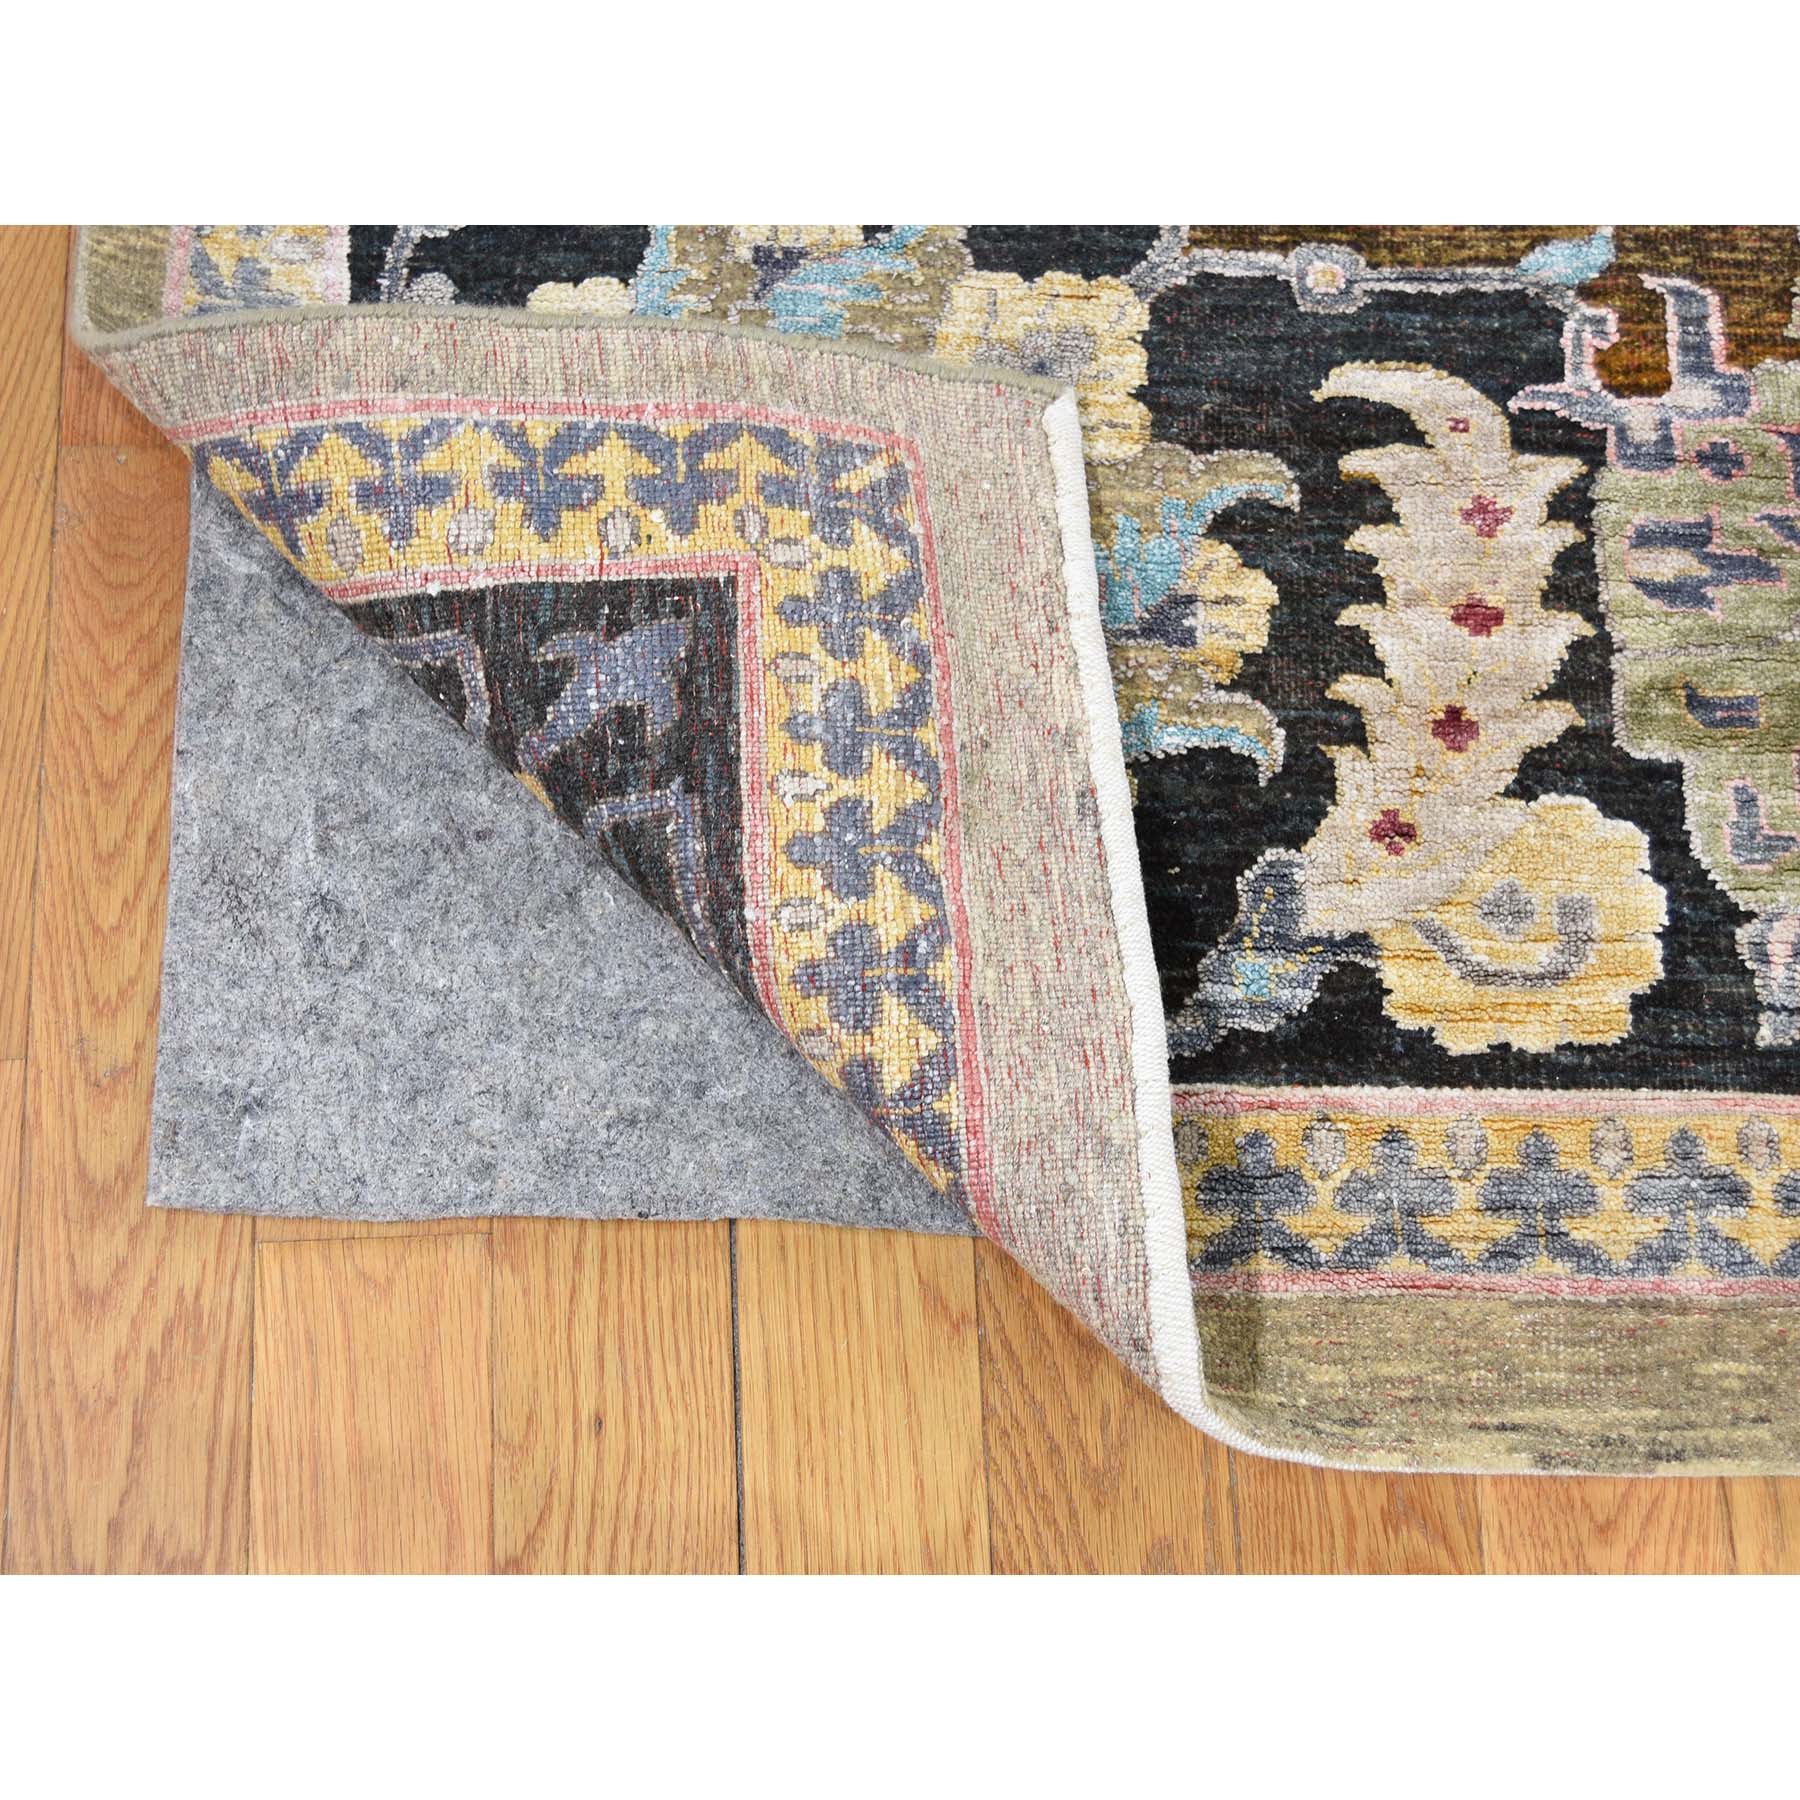 11-8--x15- Arts And Crafts Design Silk with Oxidized Wool Hand Knotted Oversize Rug 